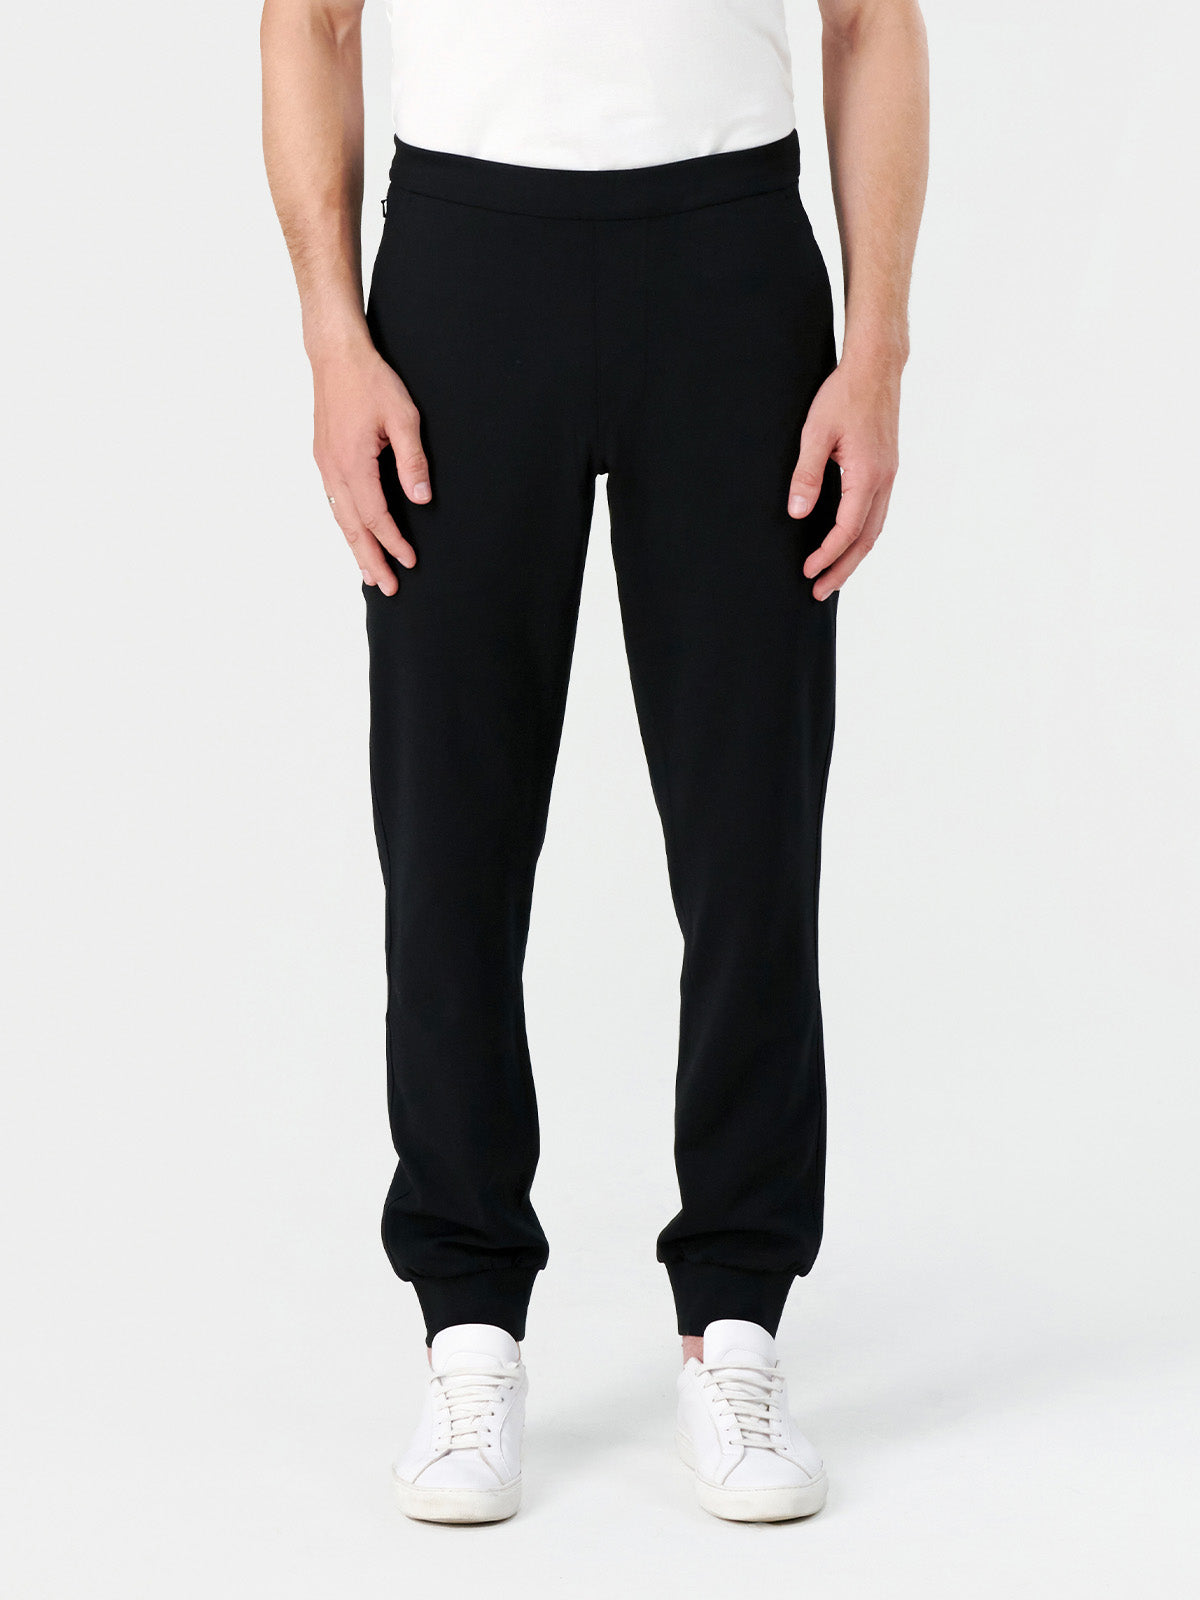 xPant Sport | Extreme Stretch Formal & Casual Combo Suit Pants